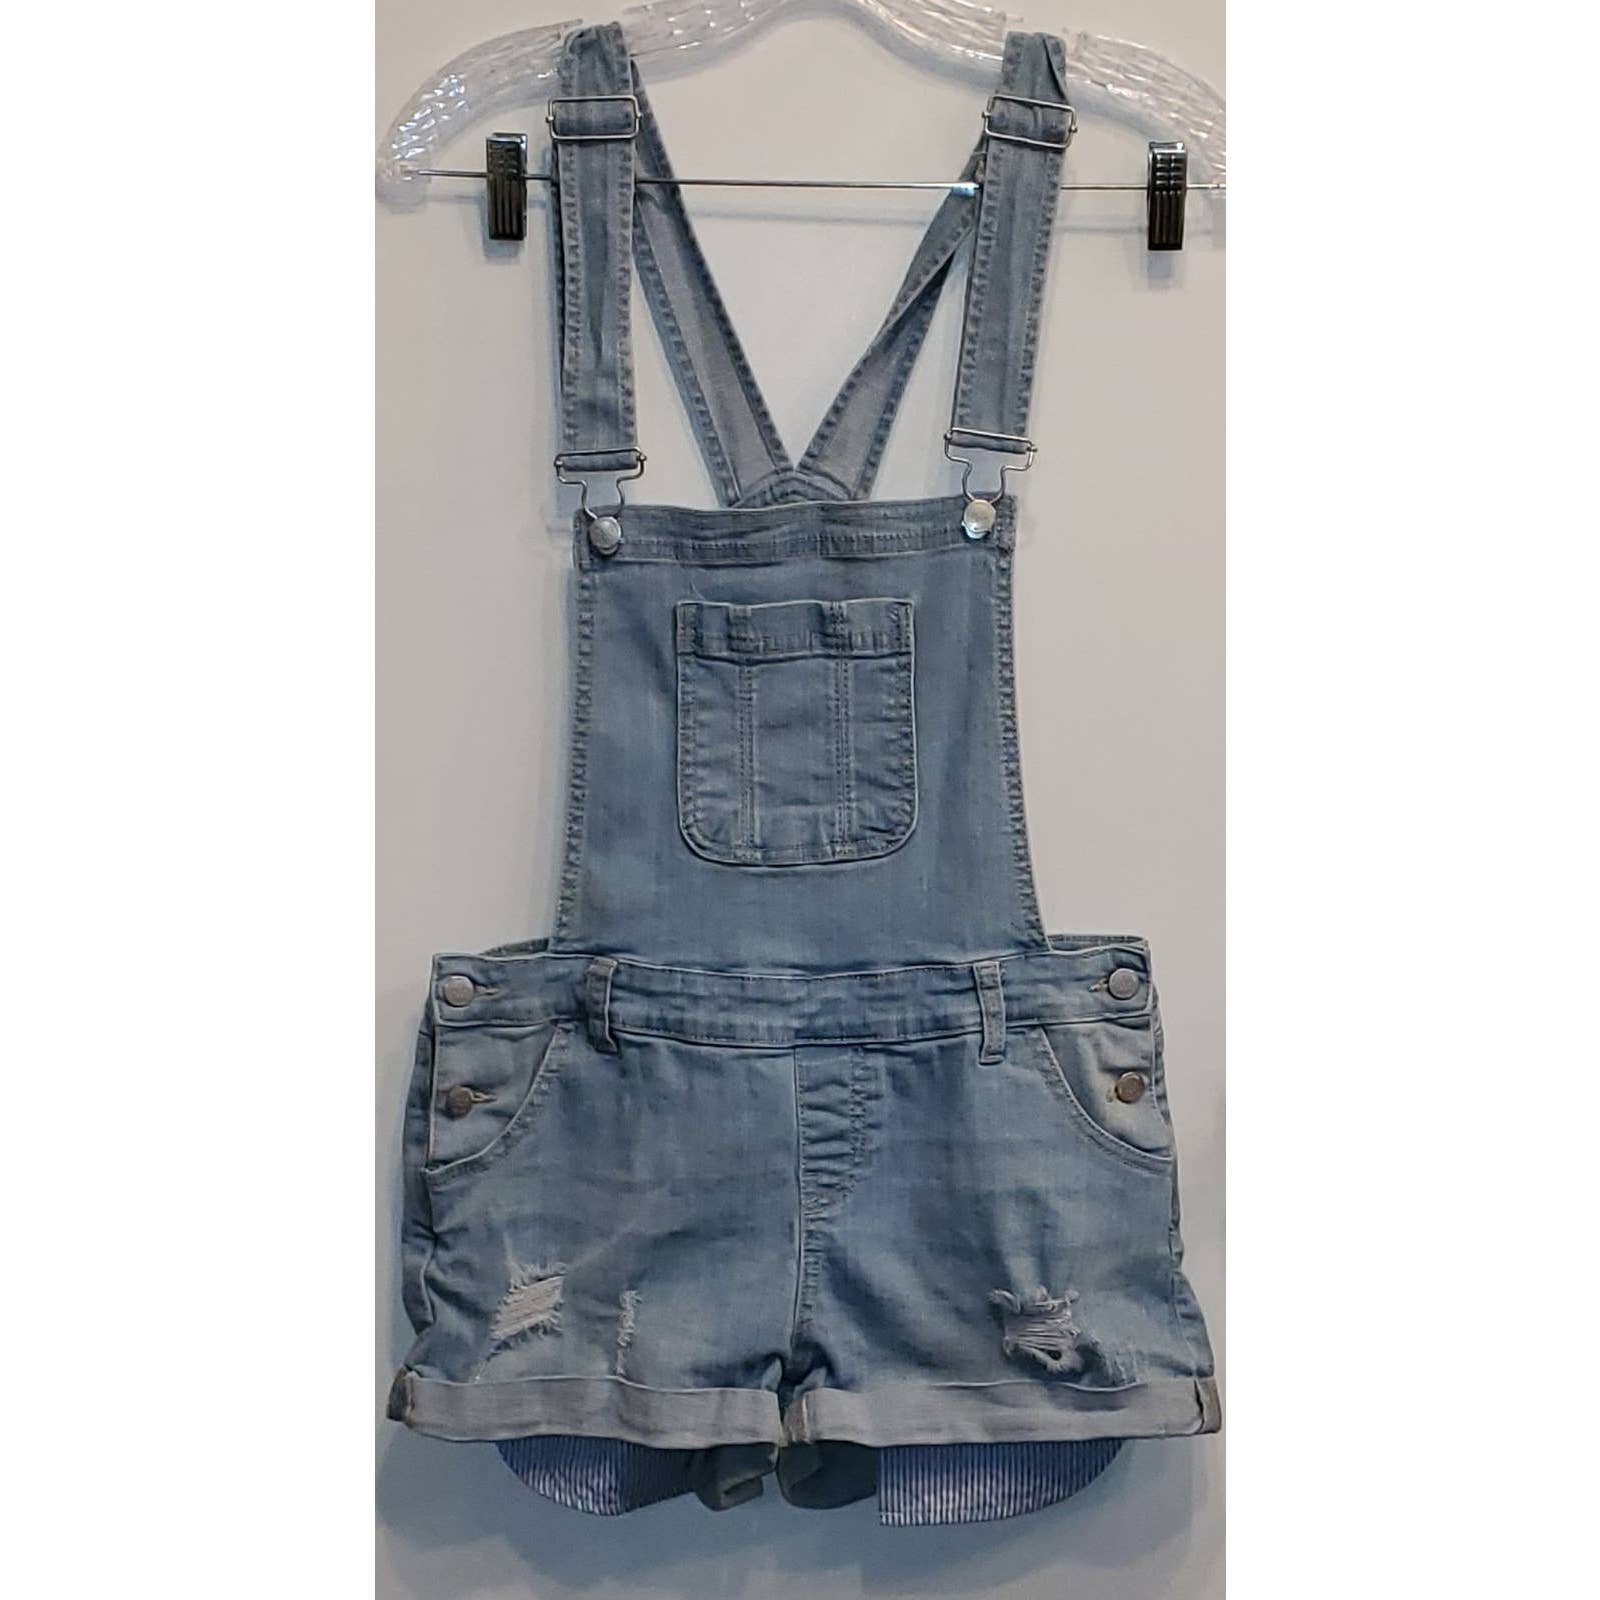 Promotions  Wax Jean Basic Denim Jean with Peekaboo Pockets Shorts Overalls Size Medium G2JA5nyCL outlet online shop